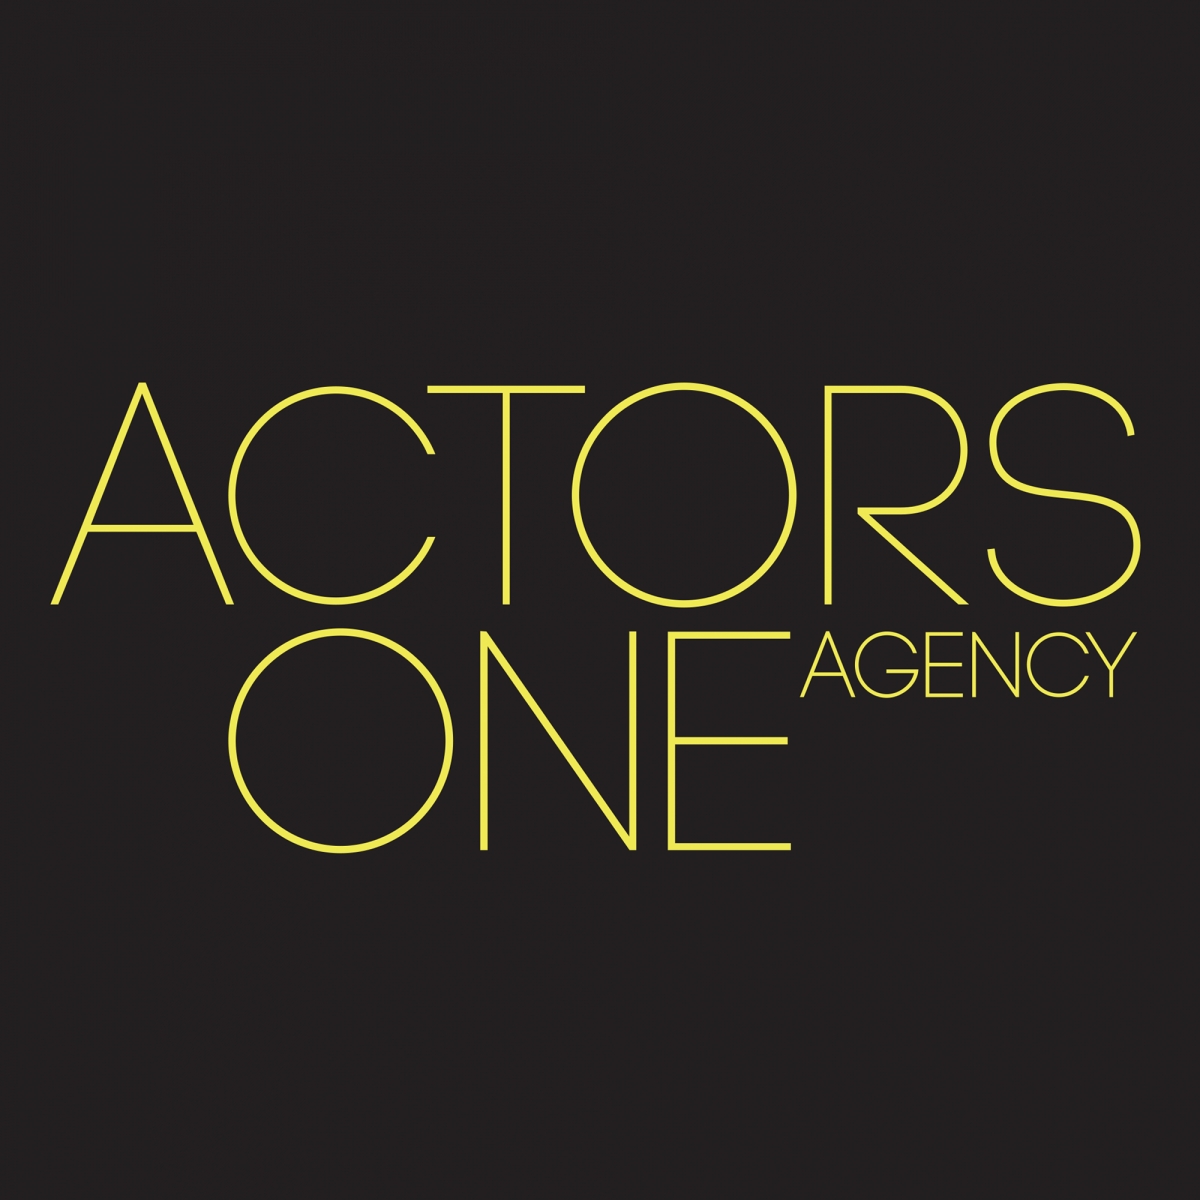 Actors One Agency And Faces One Agency